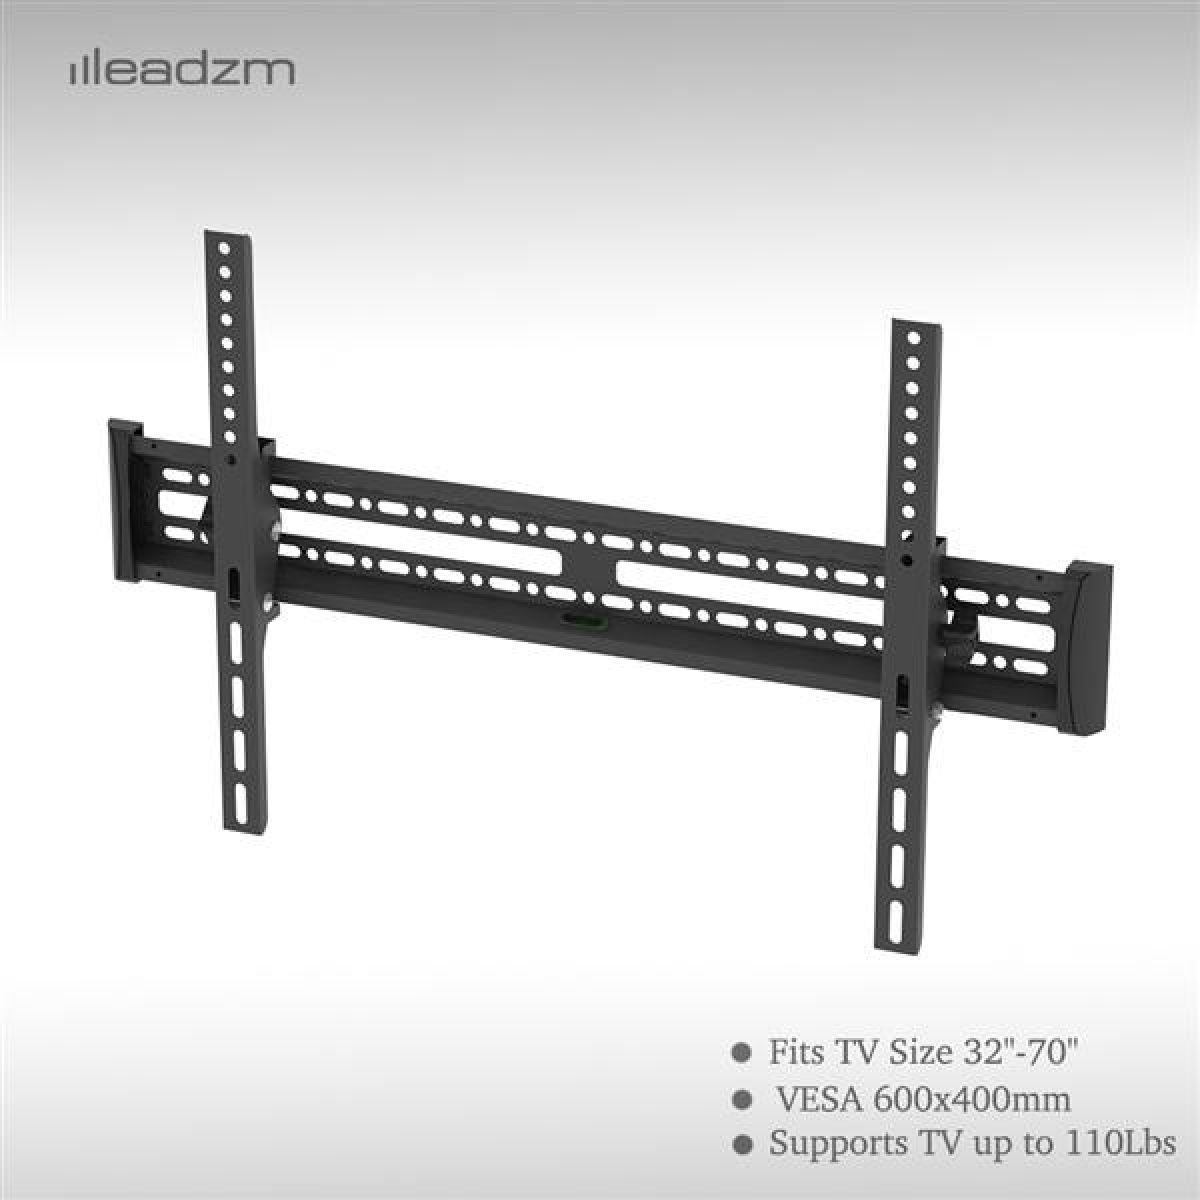 Clearance!Wall Mount Tv Bracket Wall Mount Bracket TV Stand Fits 32, 40, 42, 46, 50, 55, 65 Inch Plasma Flat Screen TV VESA400*600 Tv Wall Mount with Spirit Level Load Capacity 50kg,TMW003 - image 2 of 14